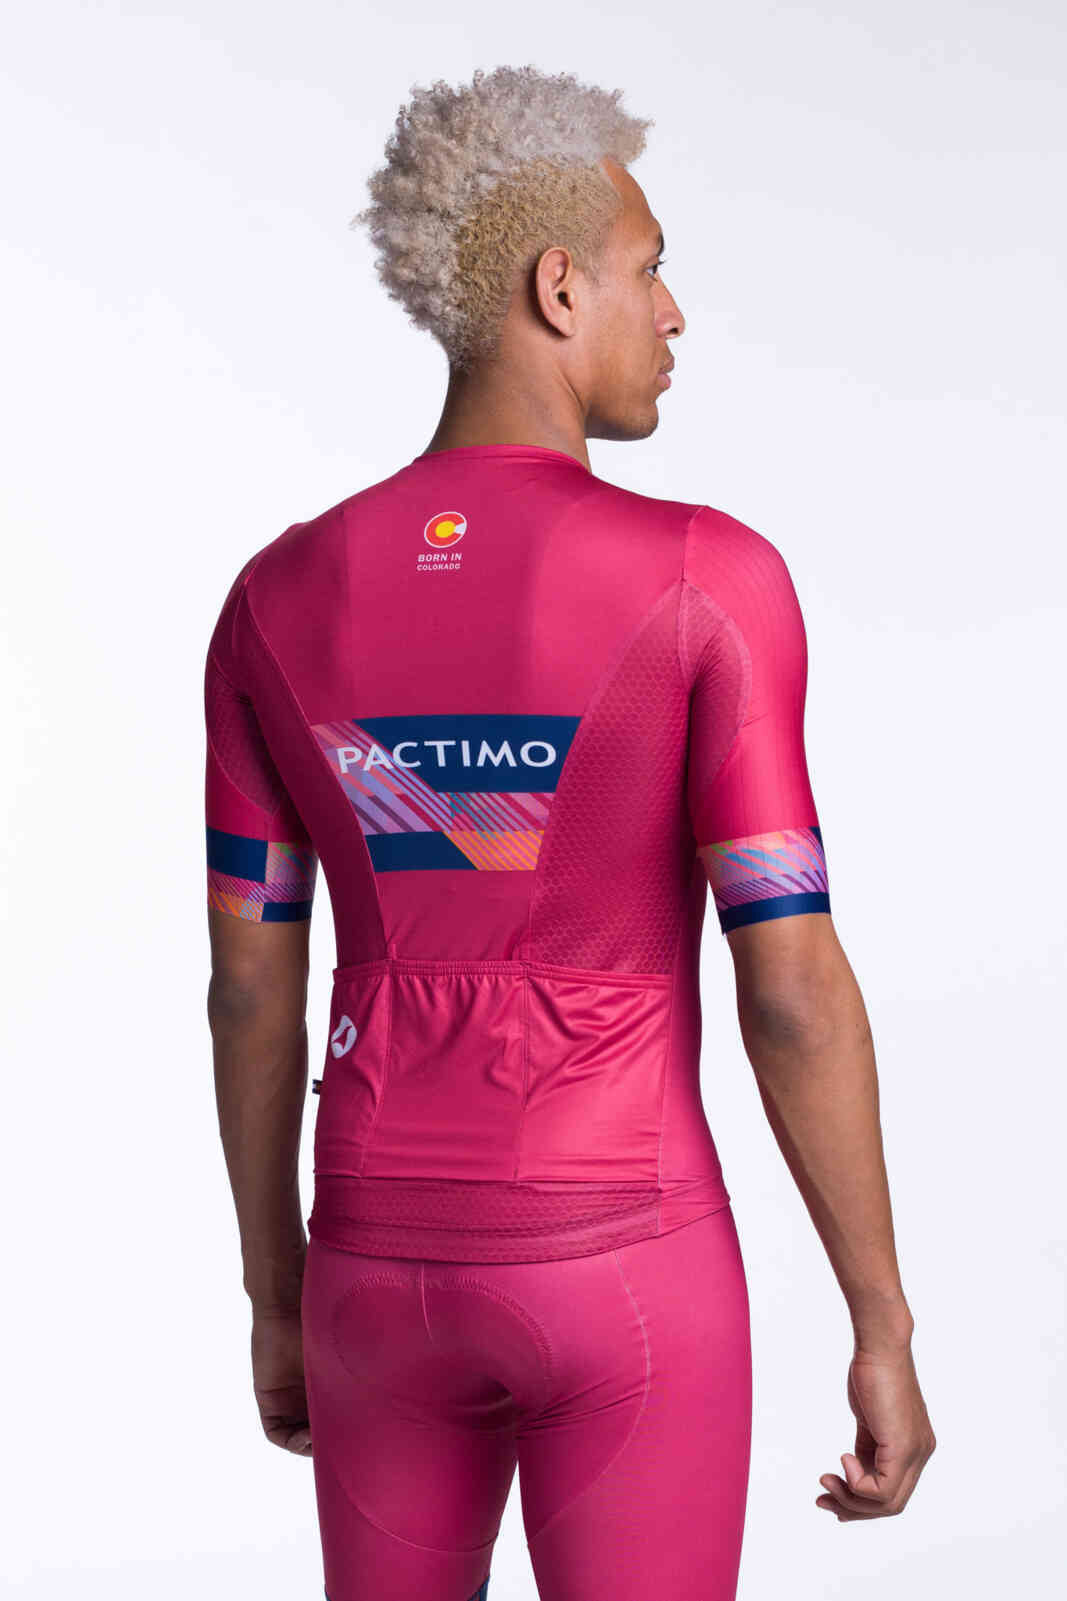 Men's Aero Fit Custom Cycling Jersey - Flyte Back View